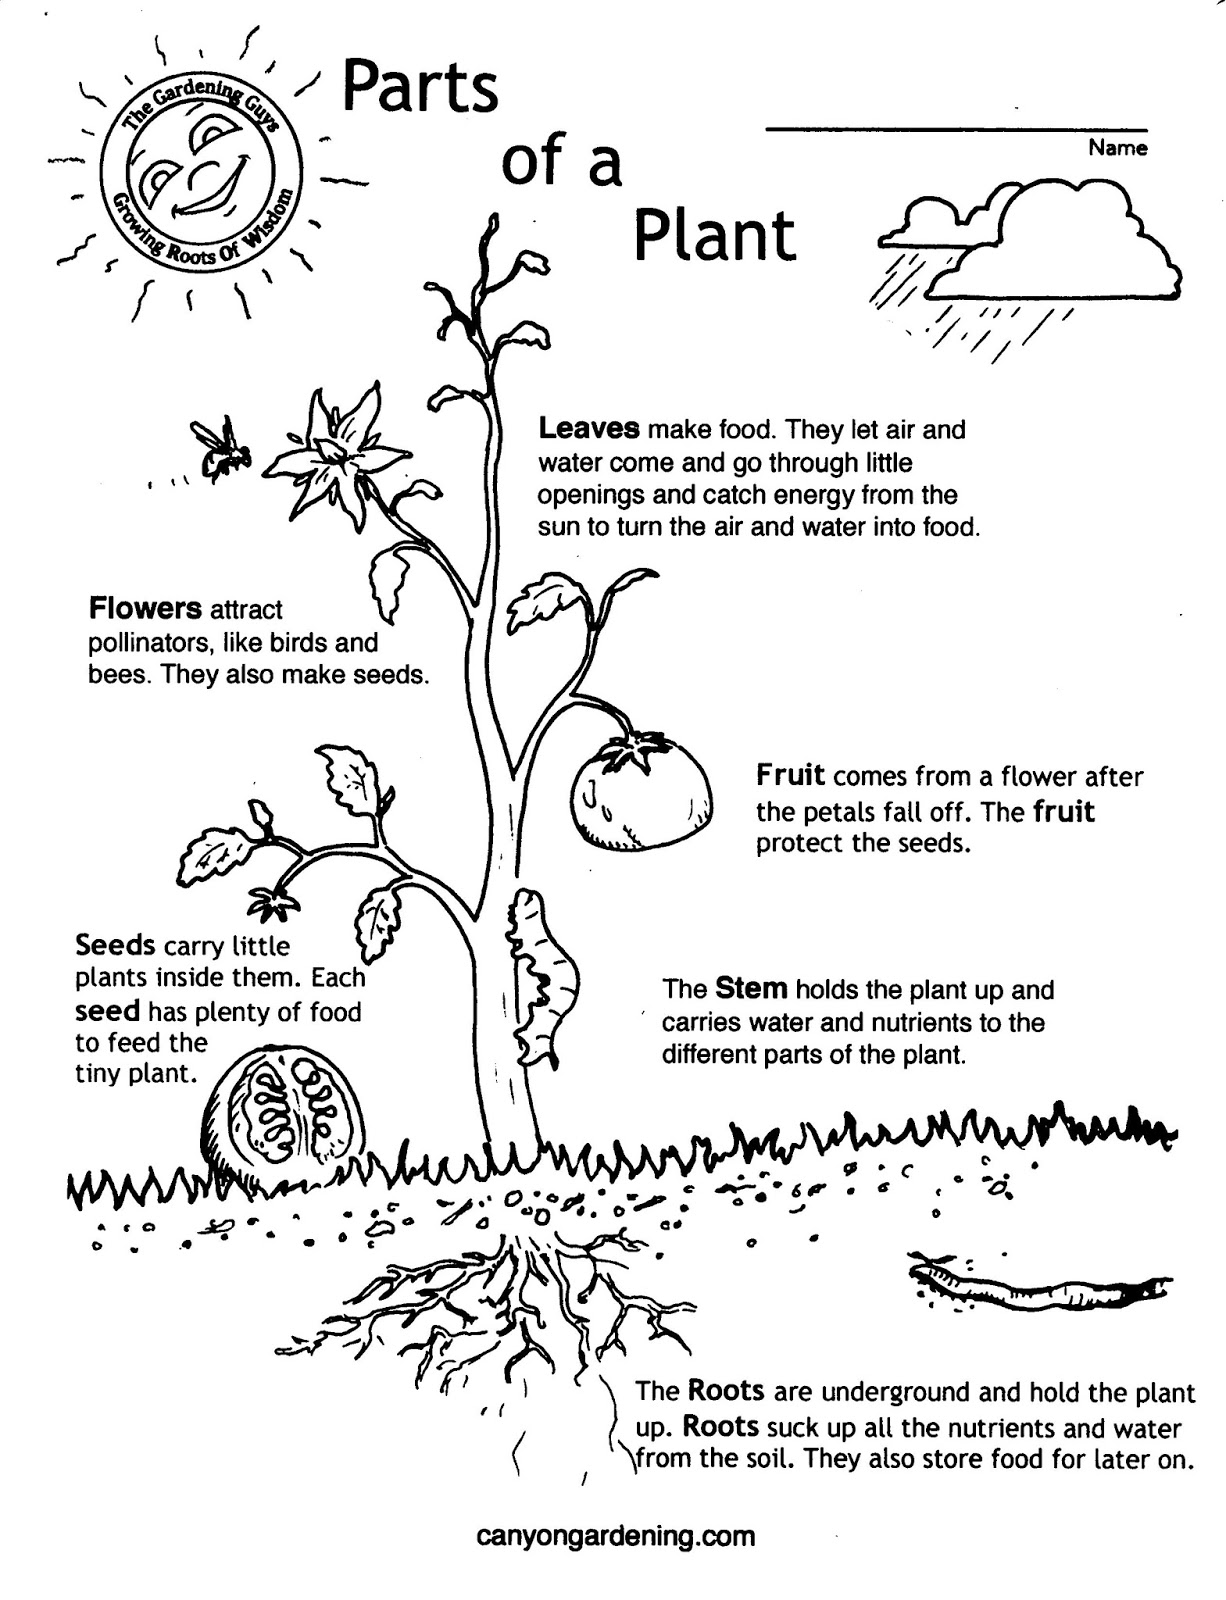  Parts Of A Plant Coloring Page 1